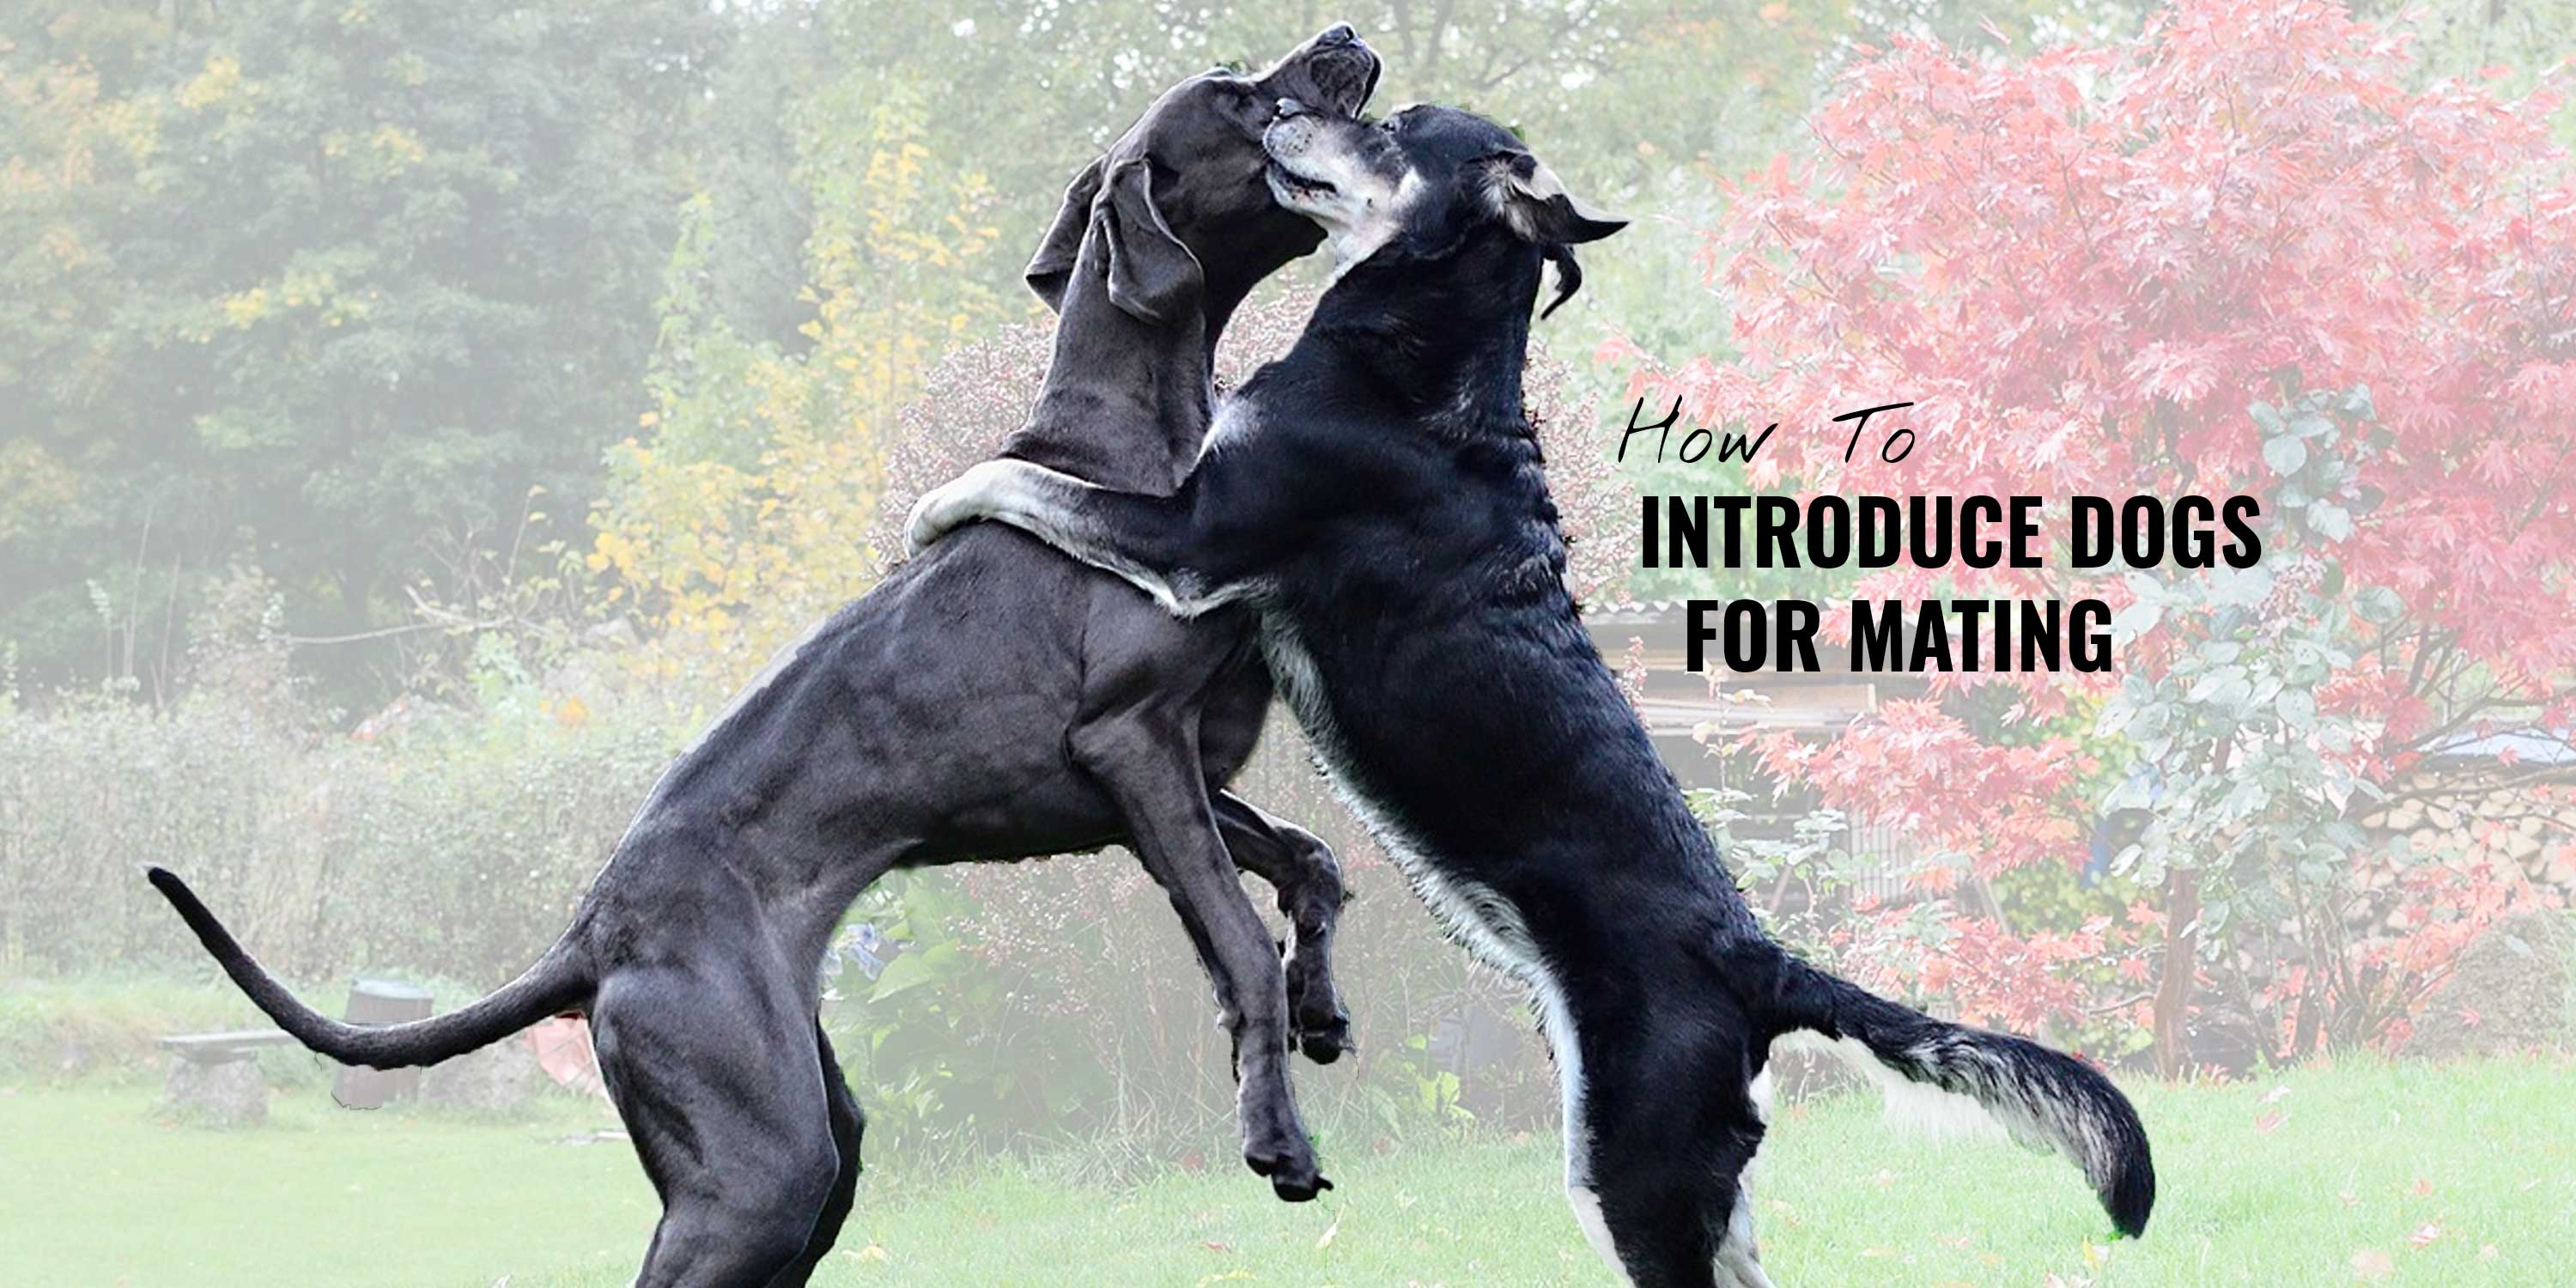 How To Introduce Dogs for Mating - Breeding Business